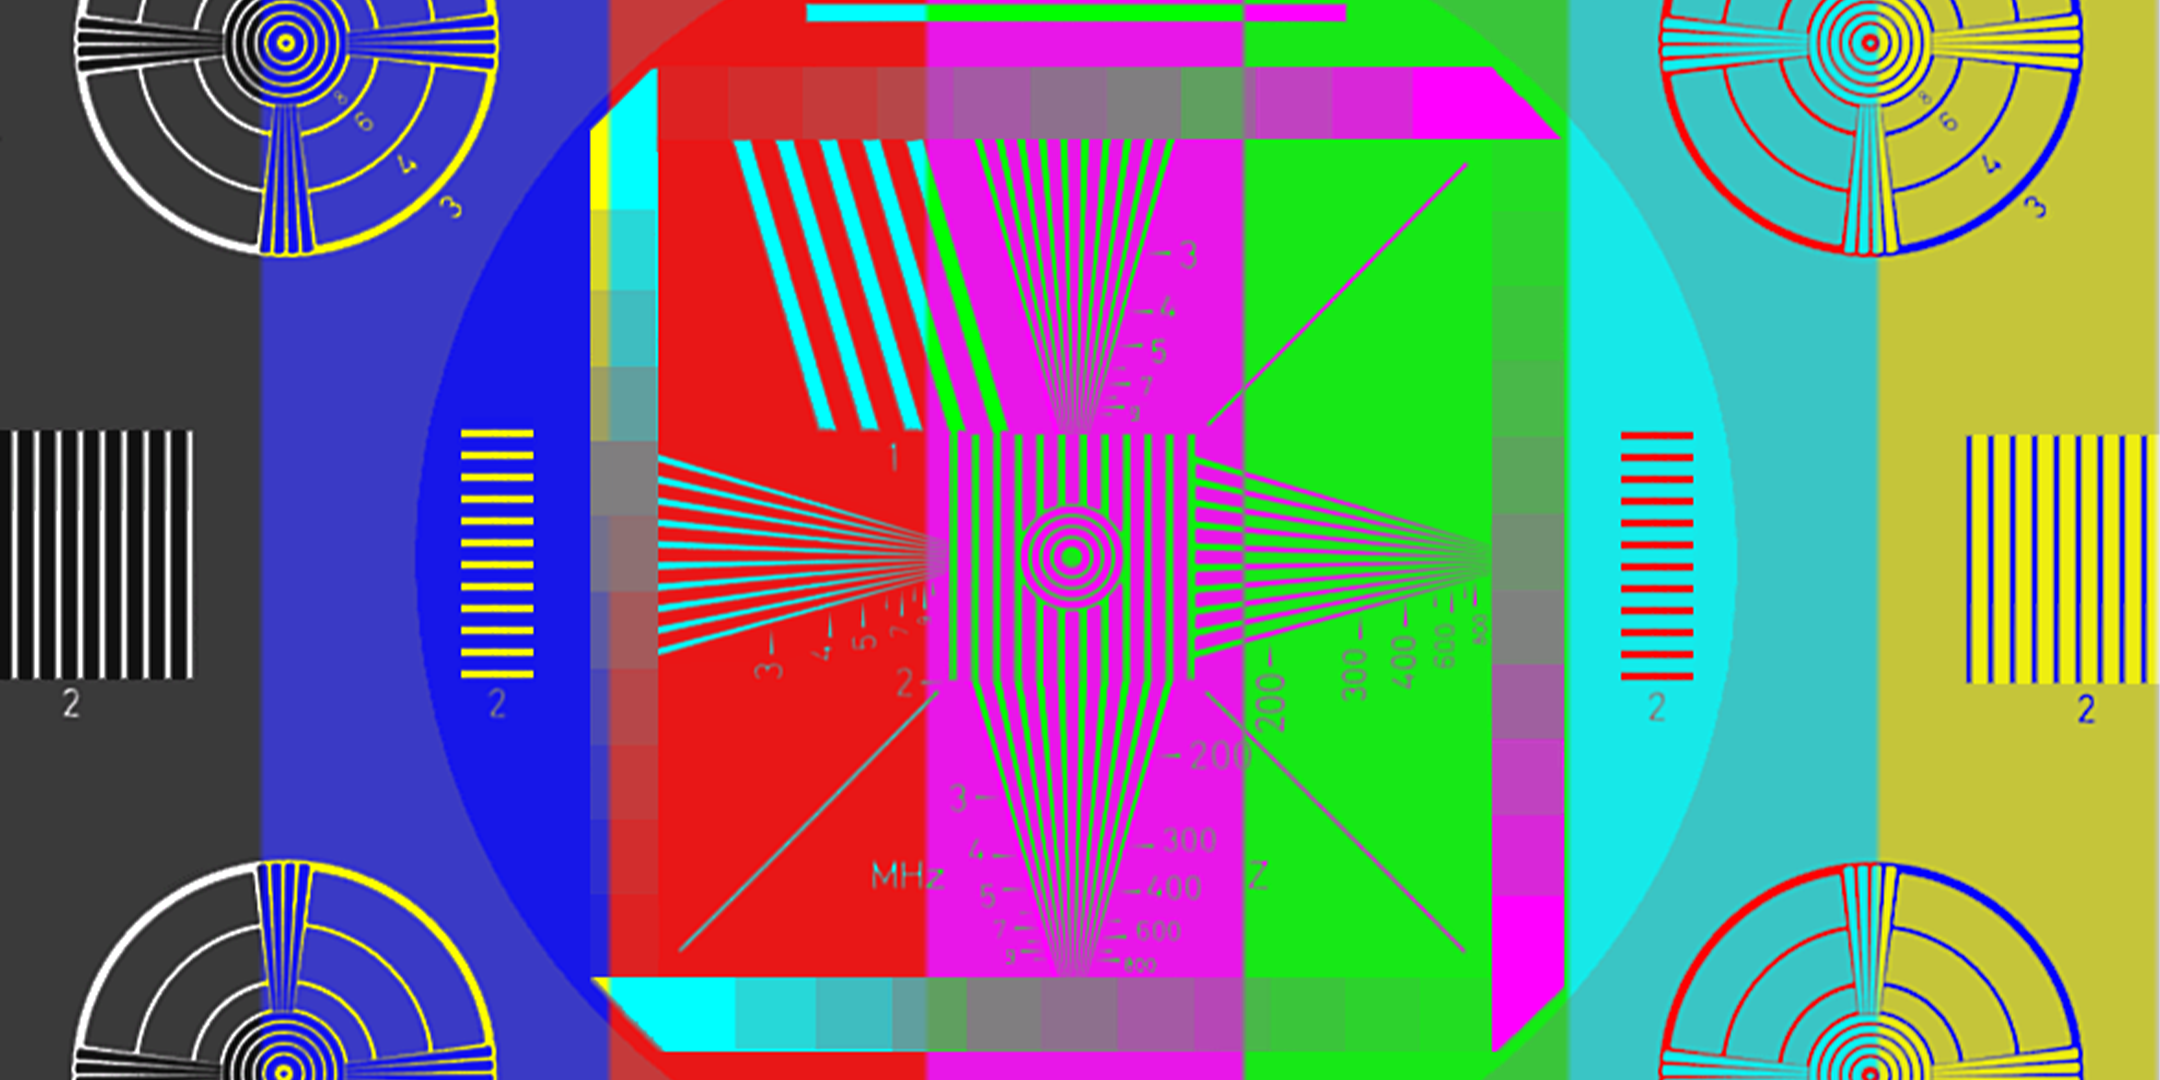 A tv test pattern with bright colors